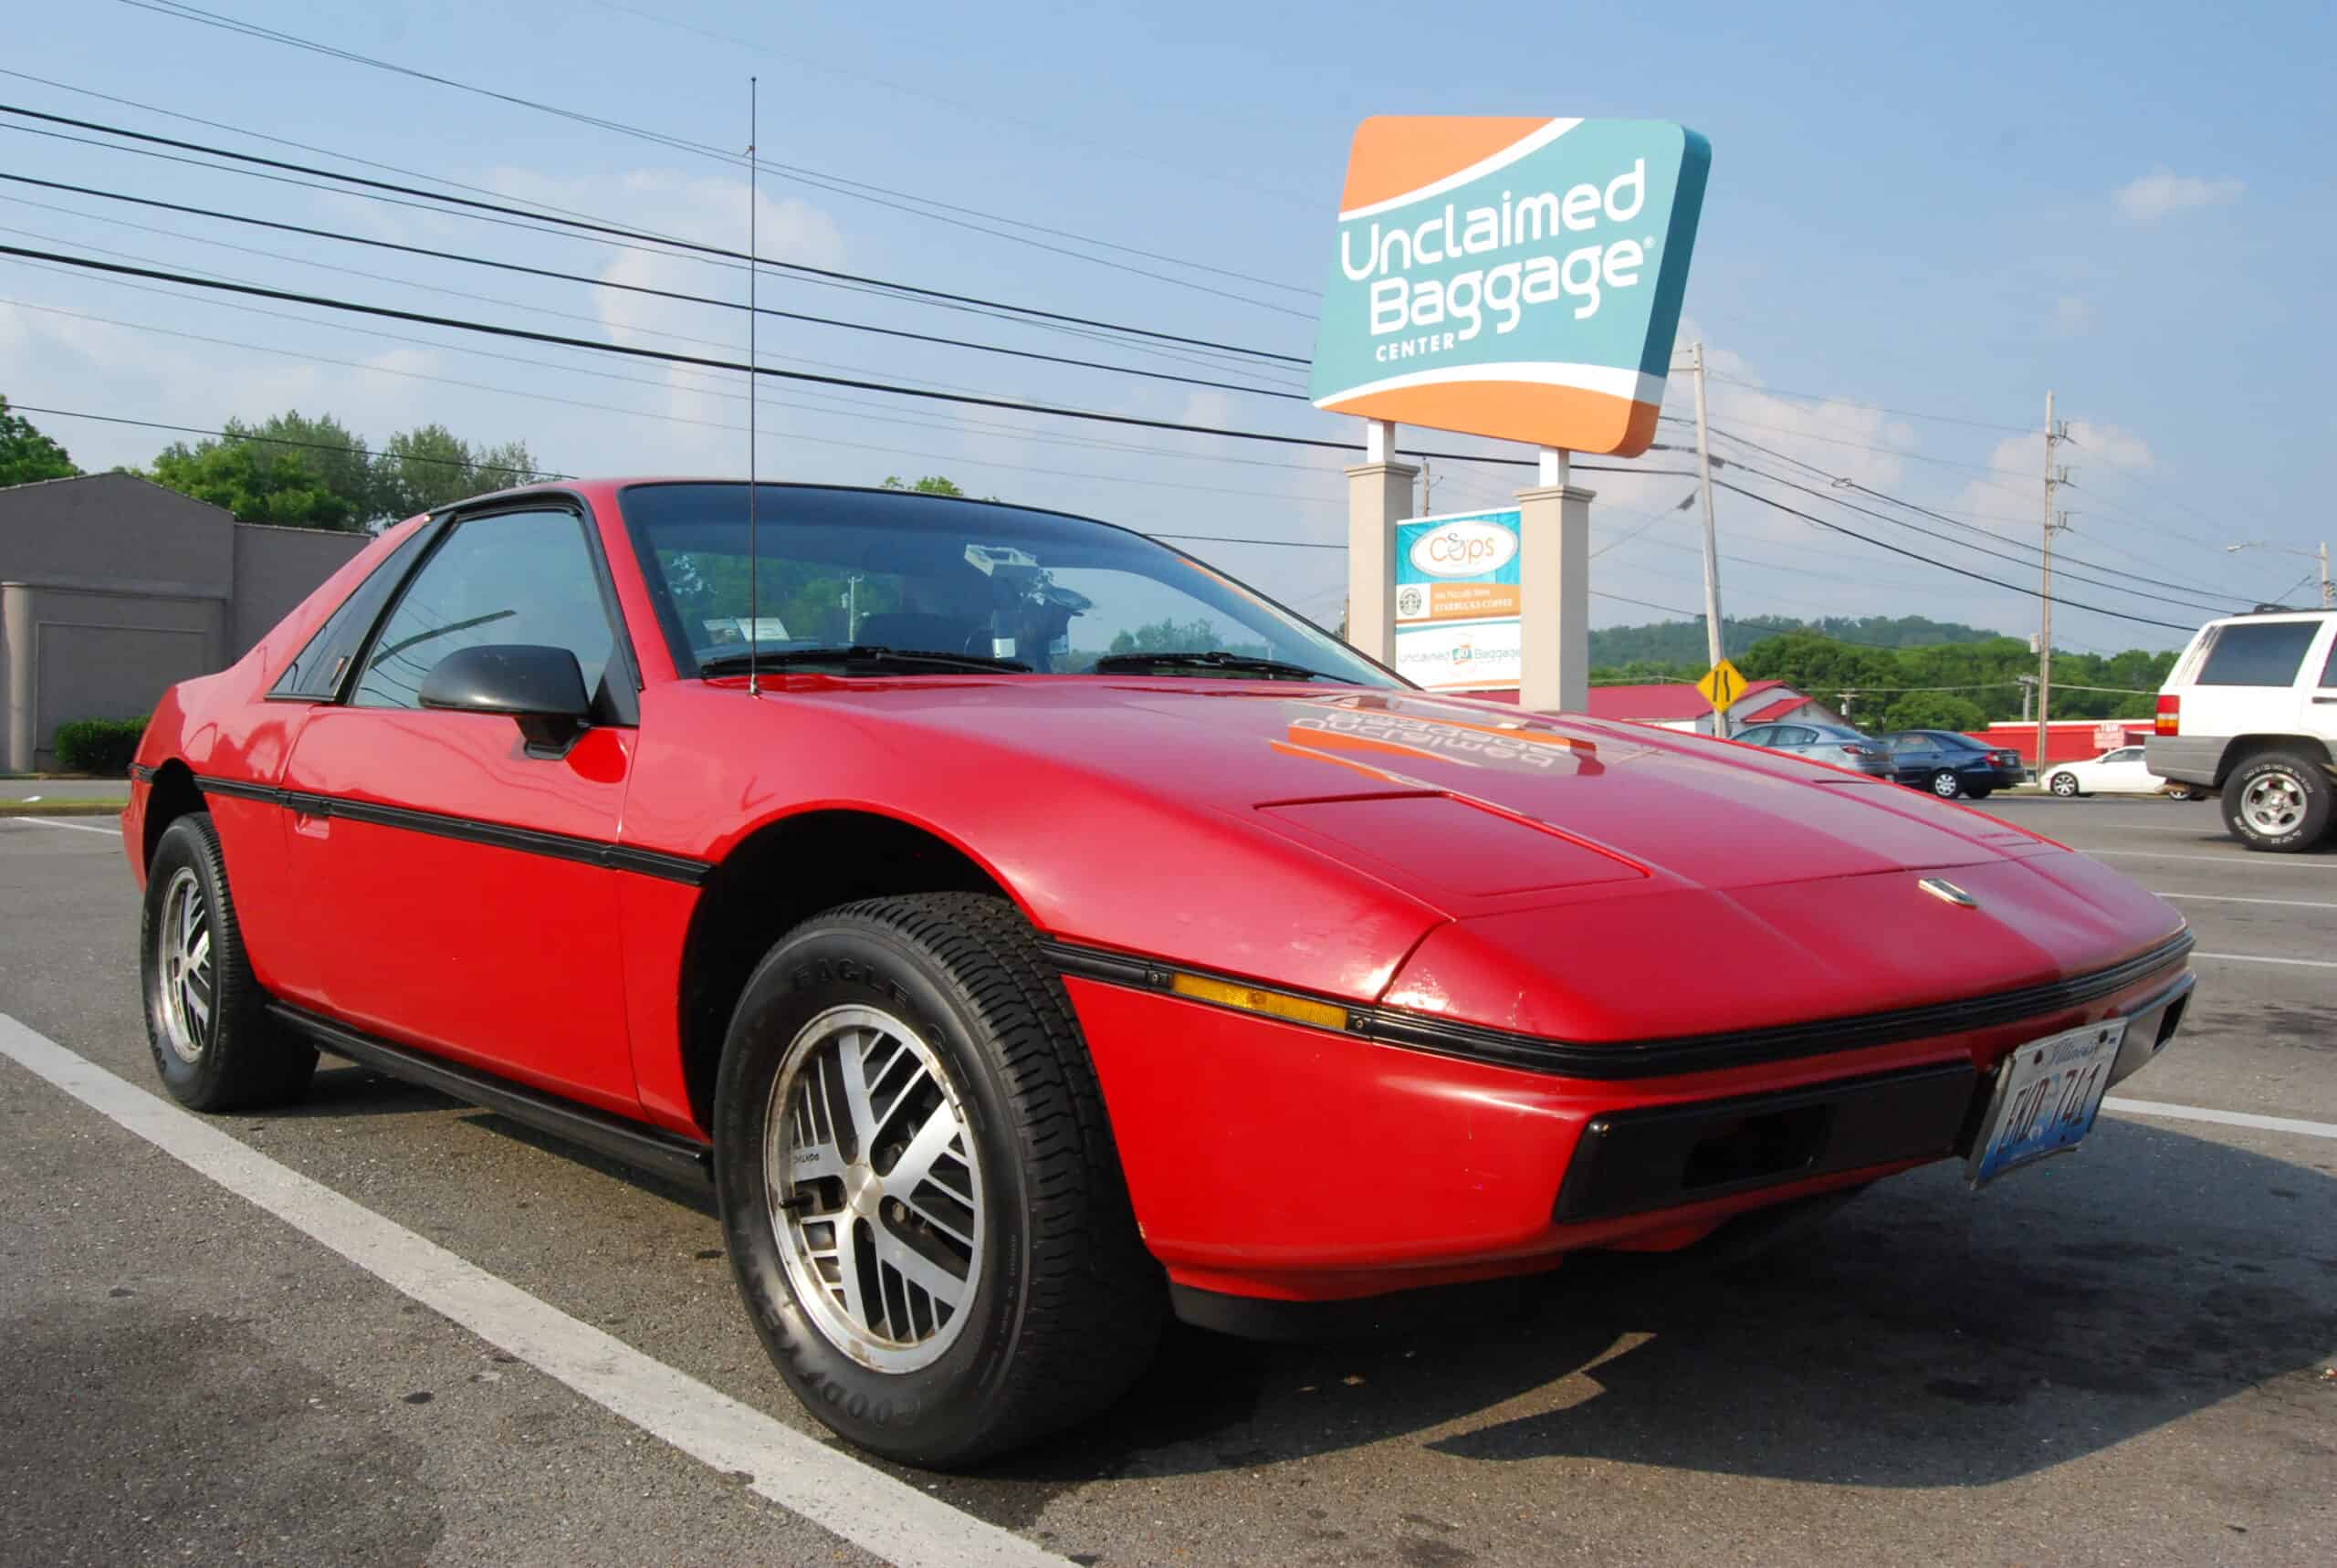 My Fiero at the Unclaimed Baggage Center, Scottsboro, AL by artistmac